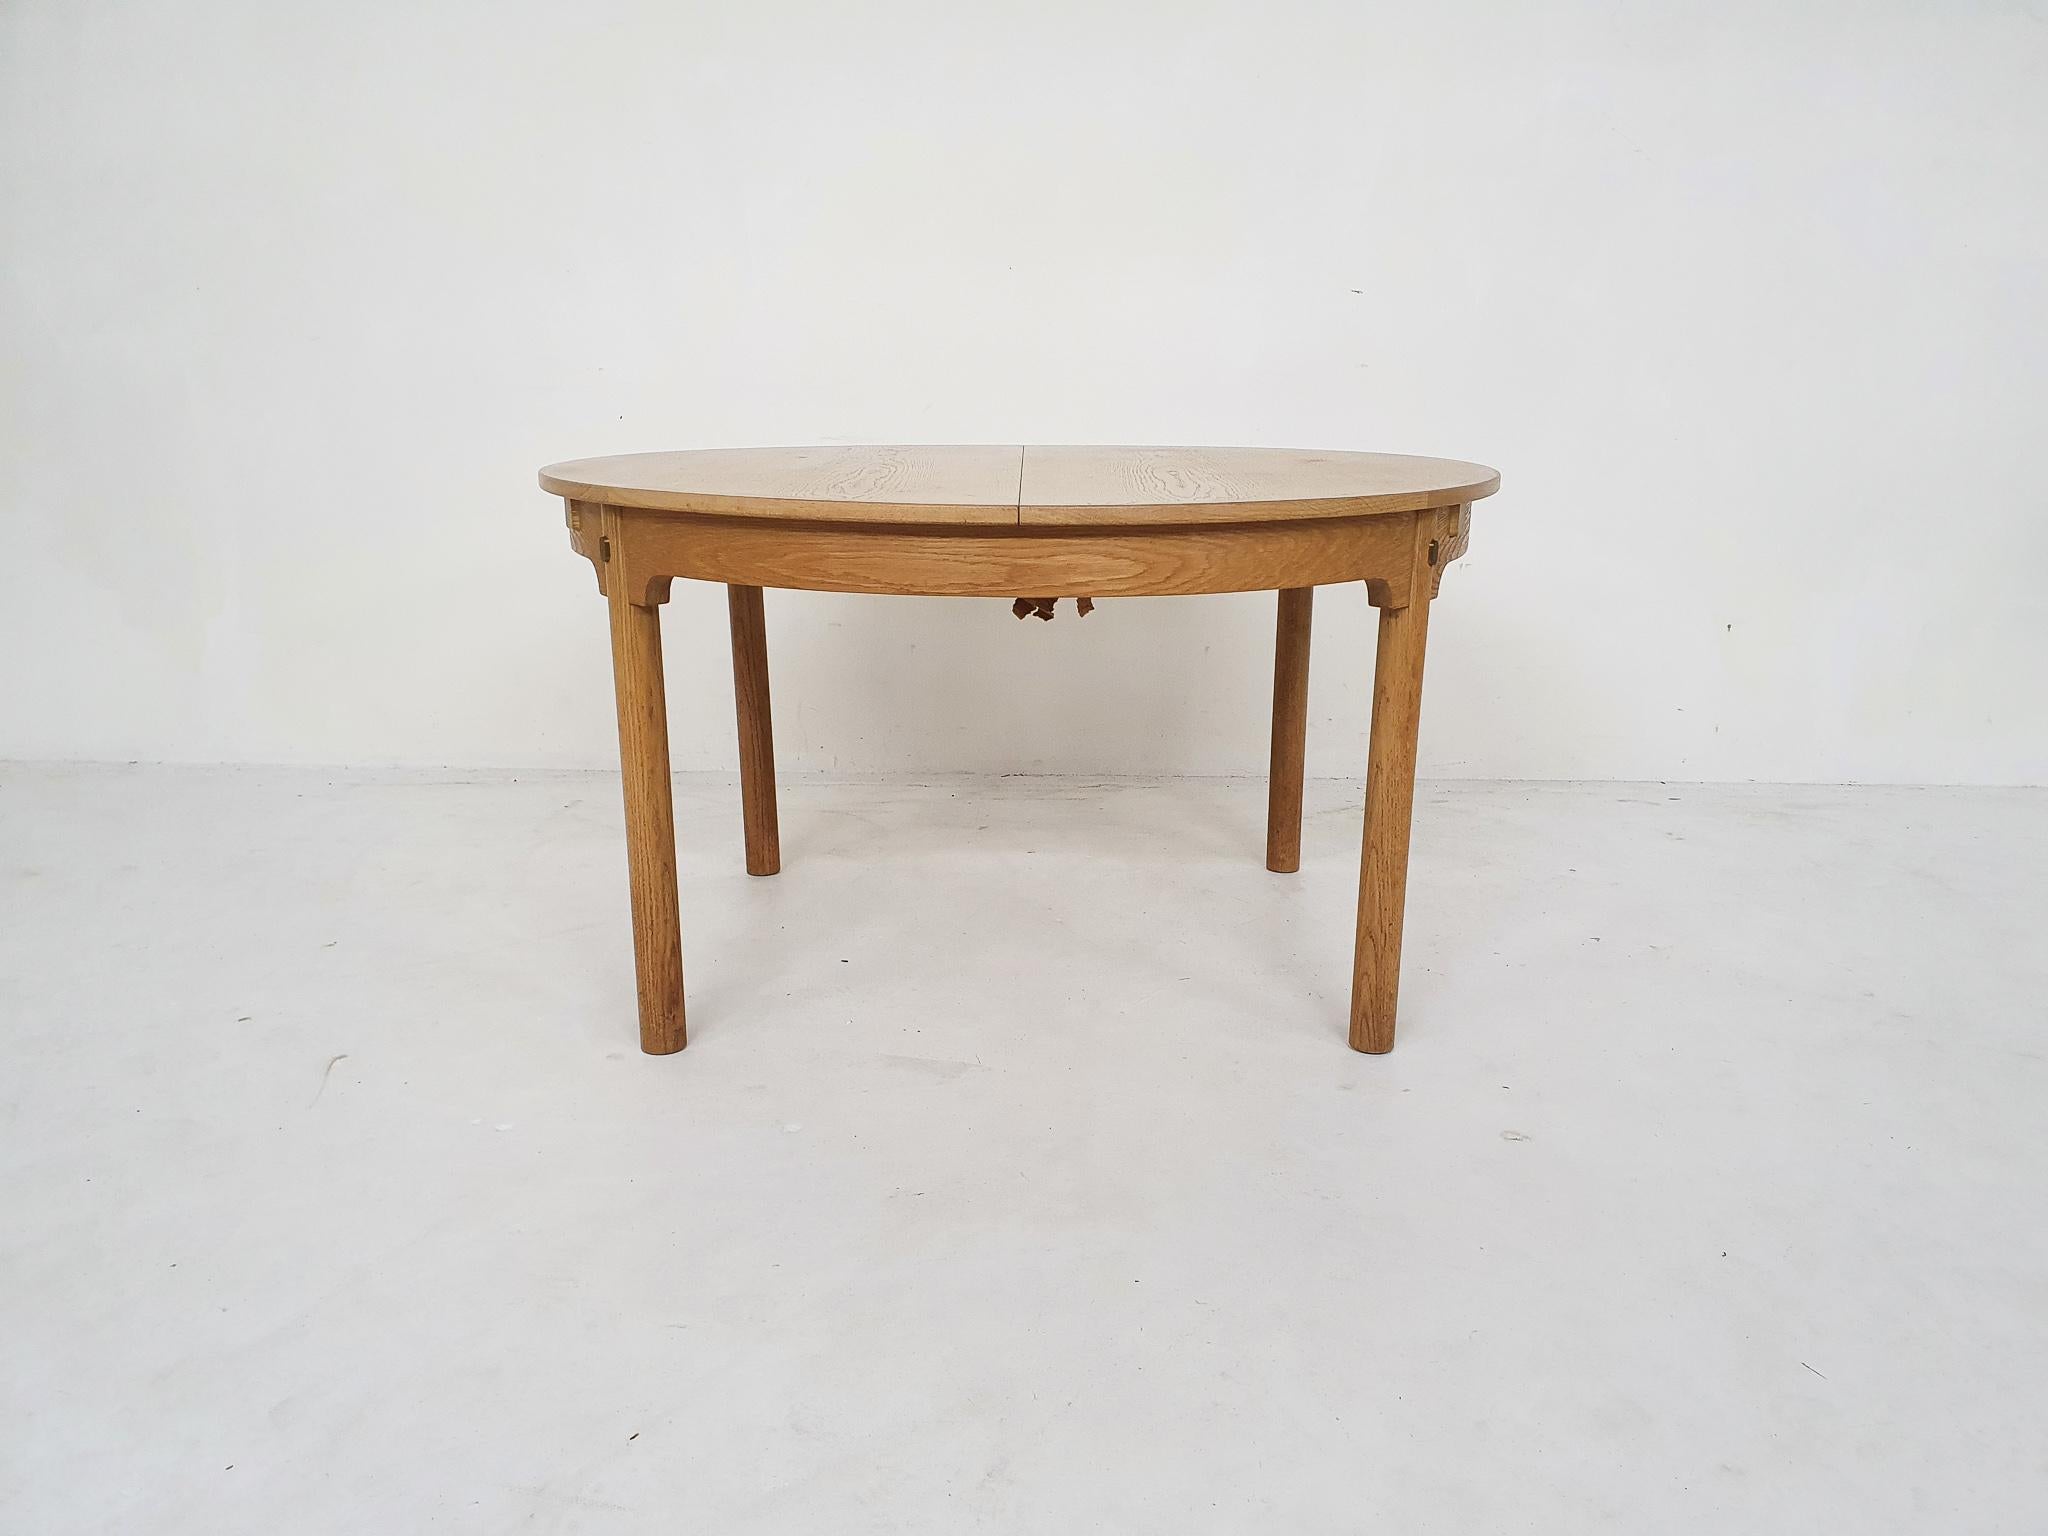 Light oak round dining table with two extension leaves which are stored under the table top. Model 140 / Oresund, designed by Borge Mogensen for Karl Andersson.
Some minor traces of use consistent with age and use.

Børge Mogensen
Børge Mogensen was